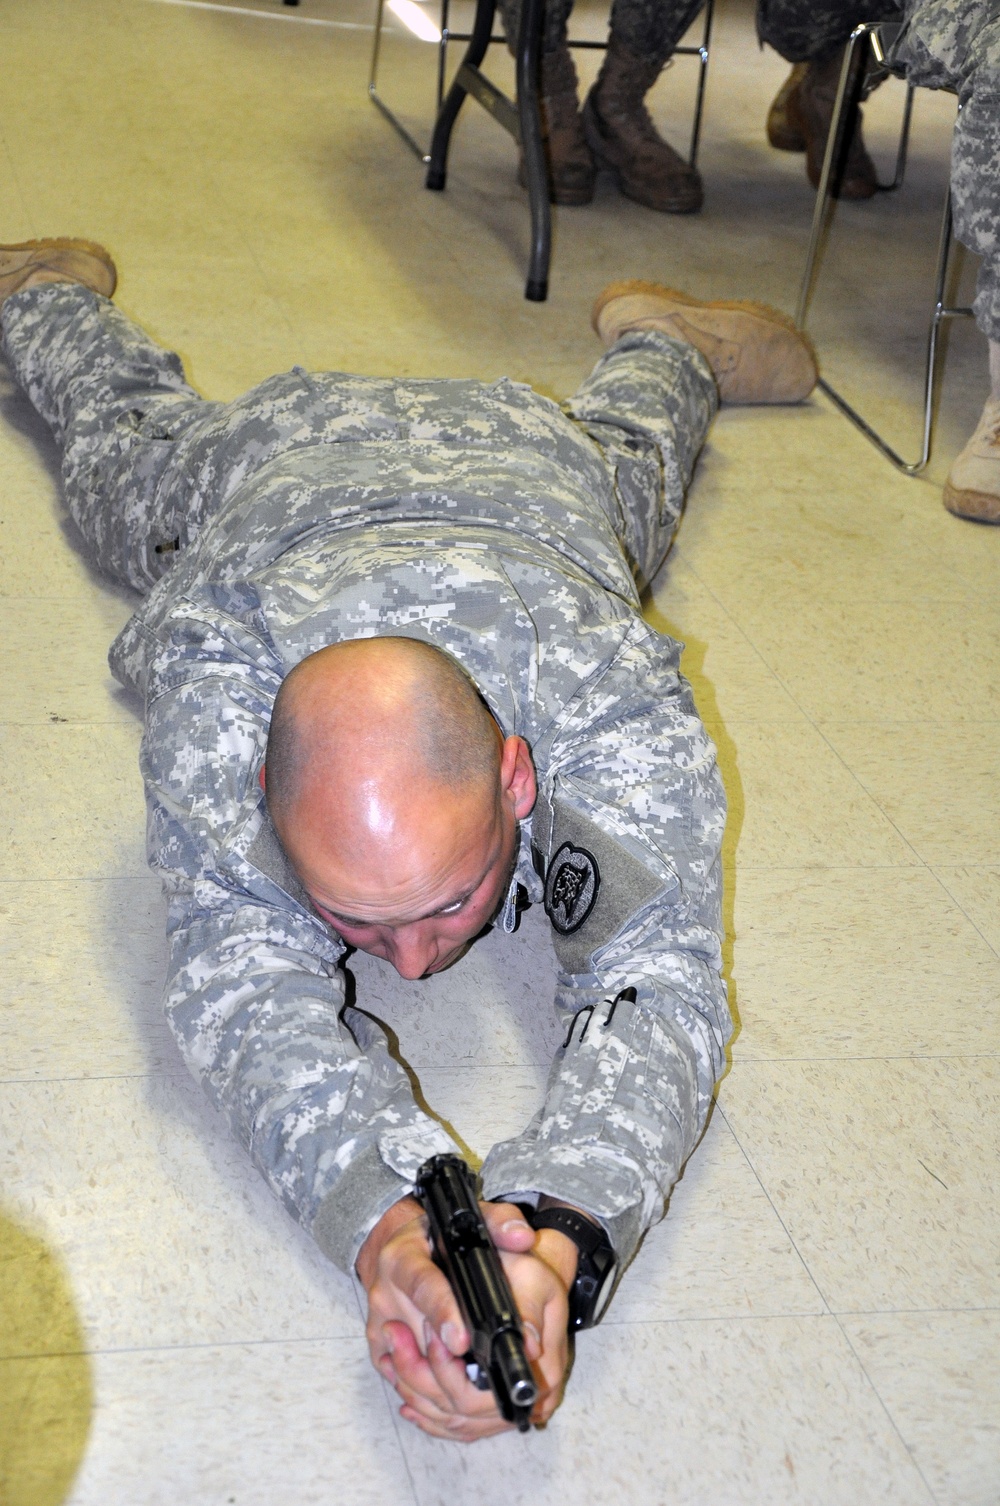 Demonstrating a prone firing position